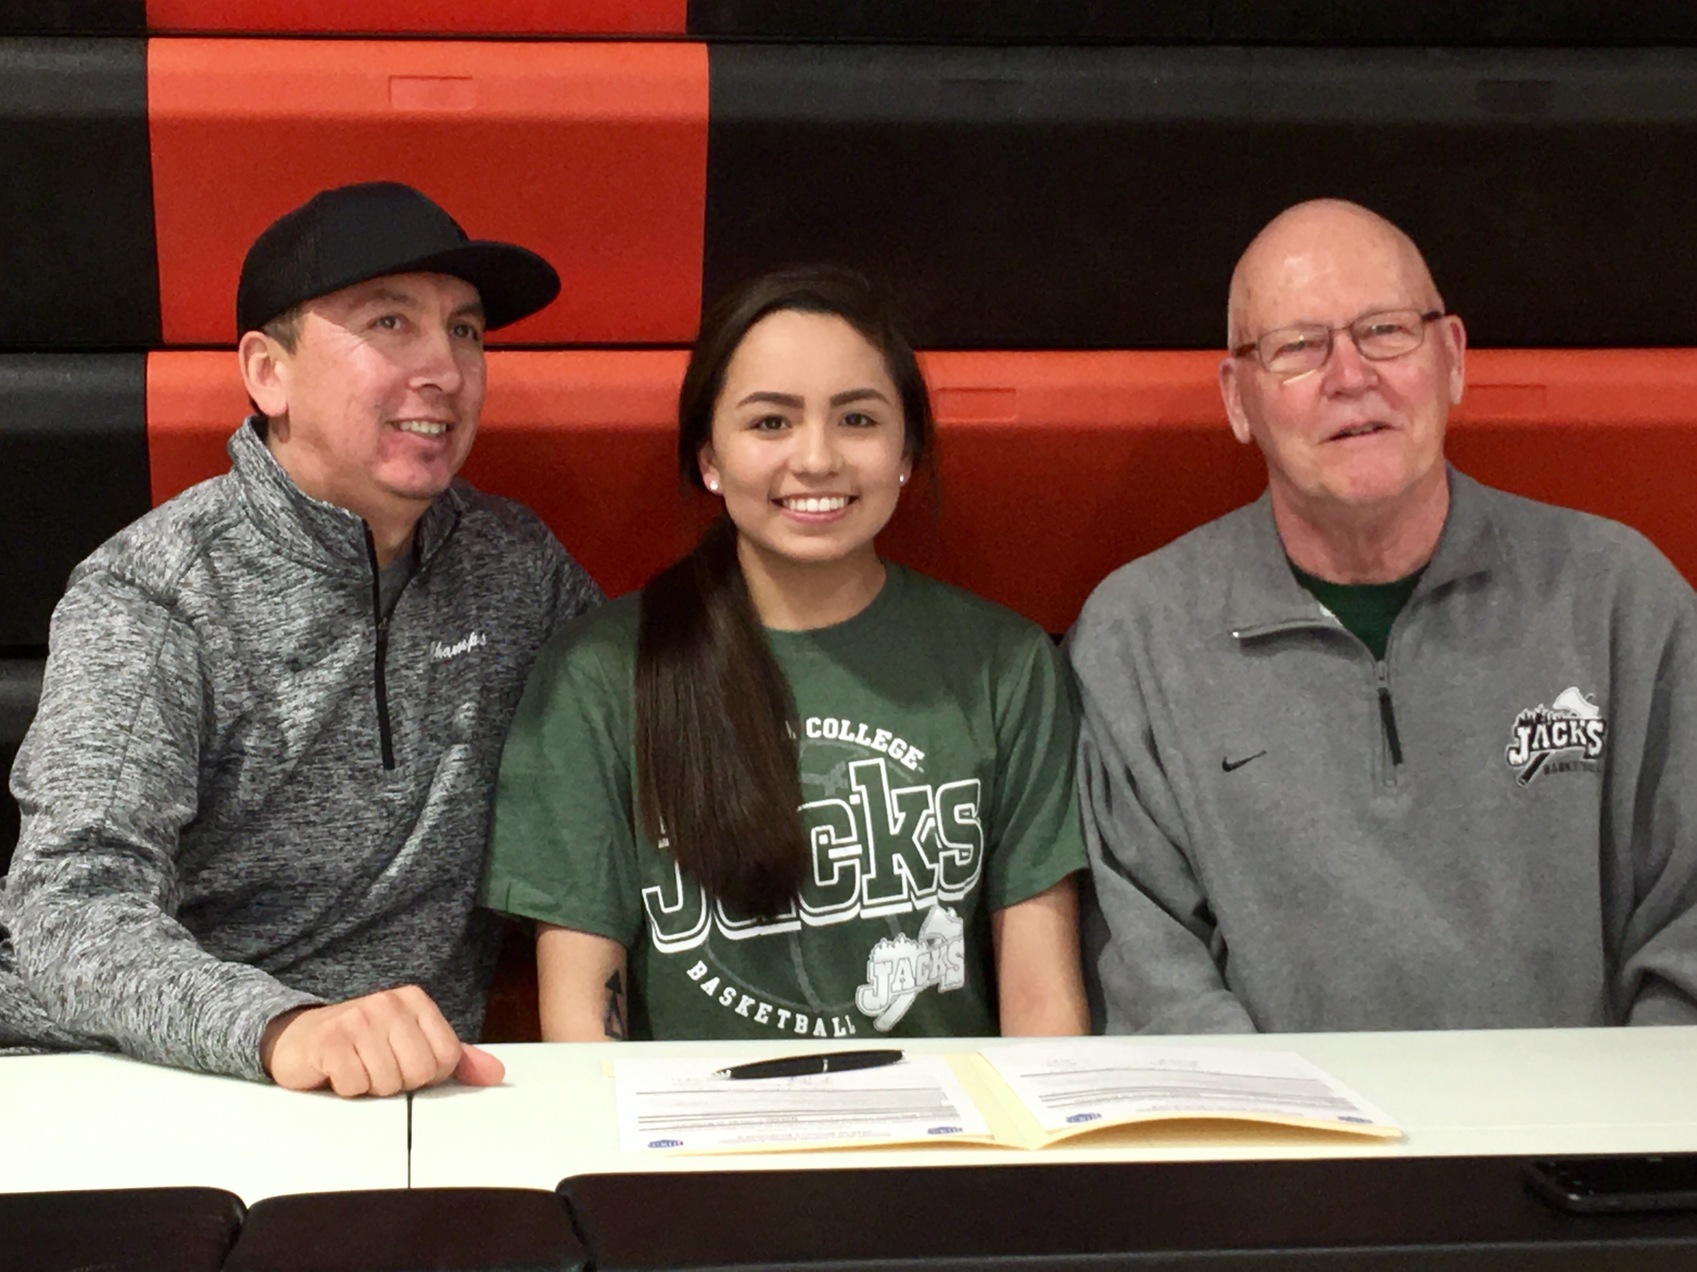 Melayna Four Bear of Killdeer will play for the Ladyjacks basketball team next season after signing a Letter of Intent last week.